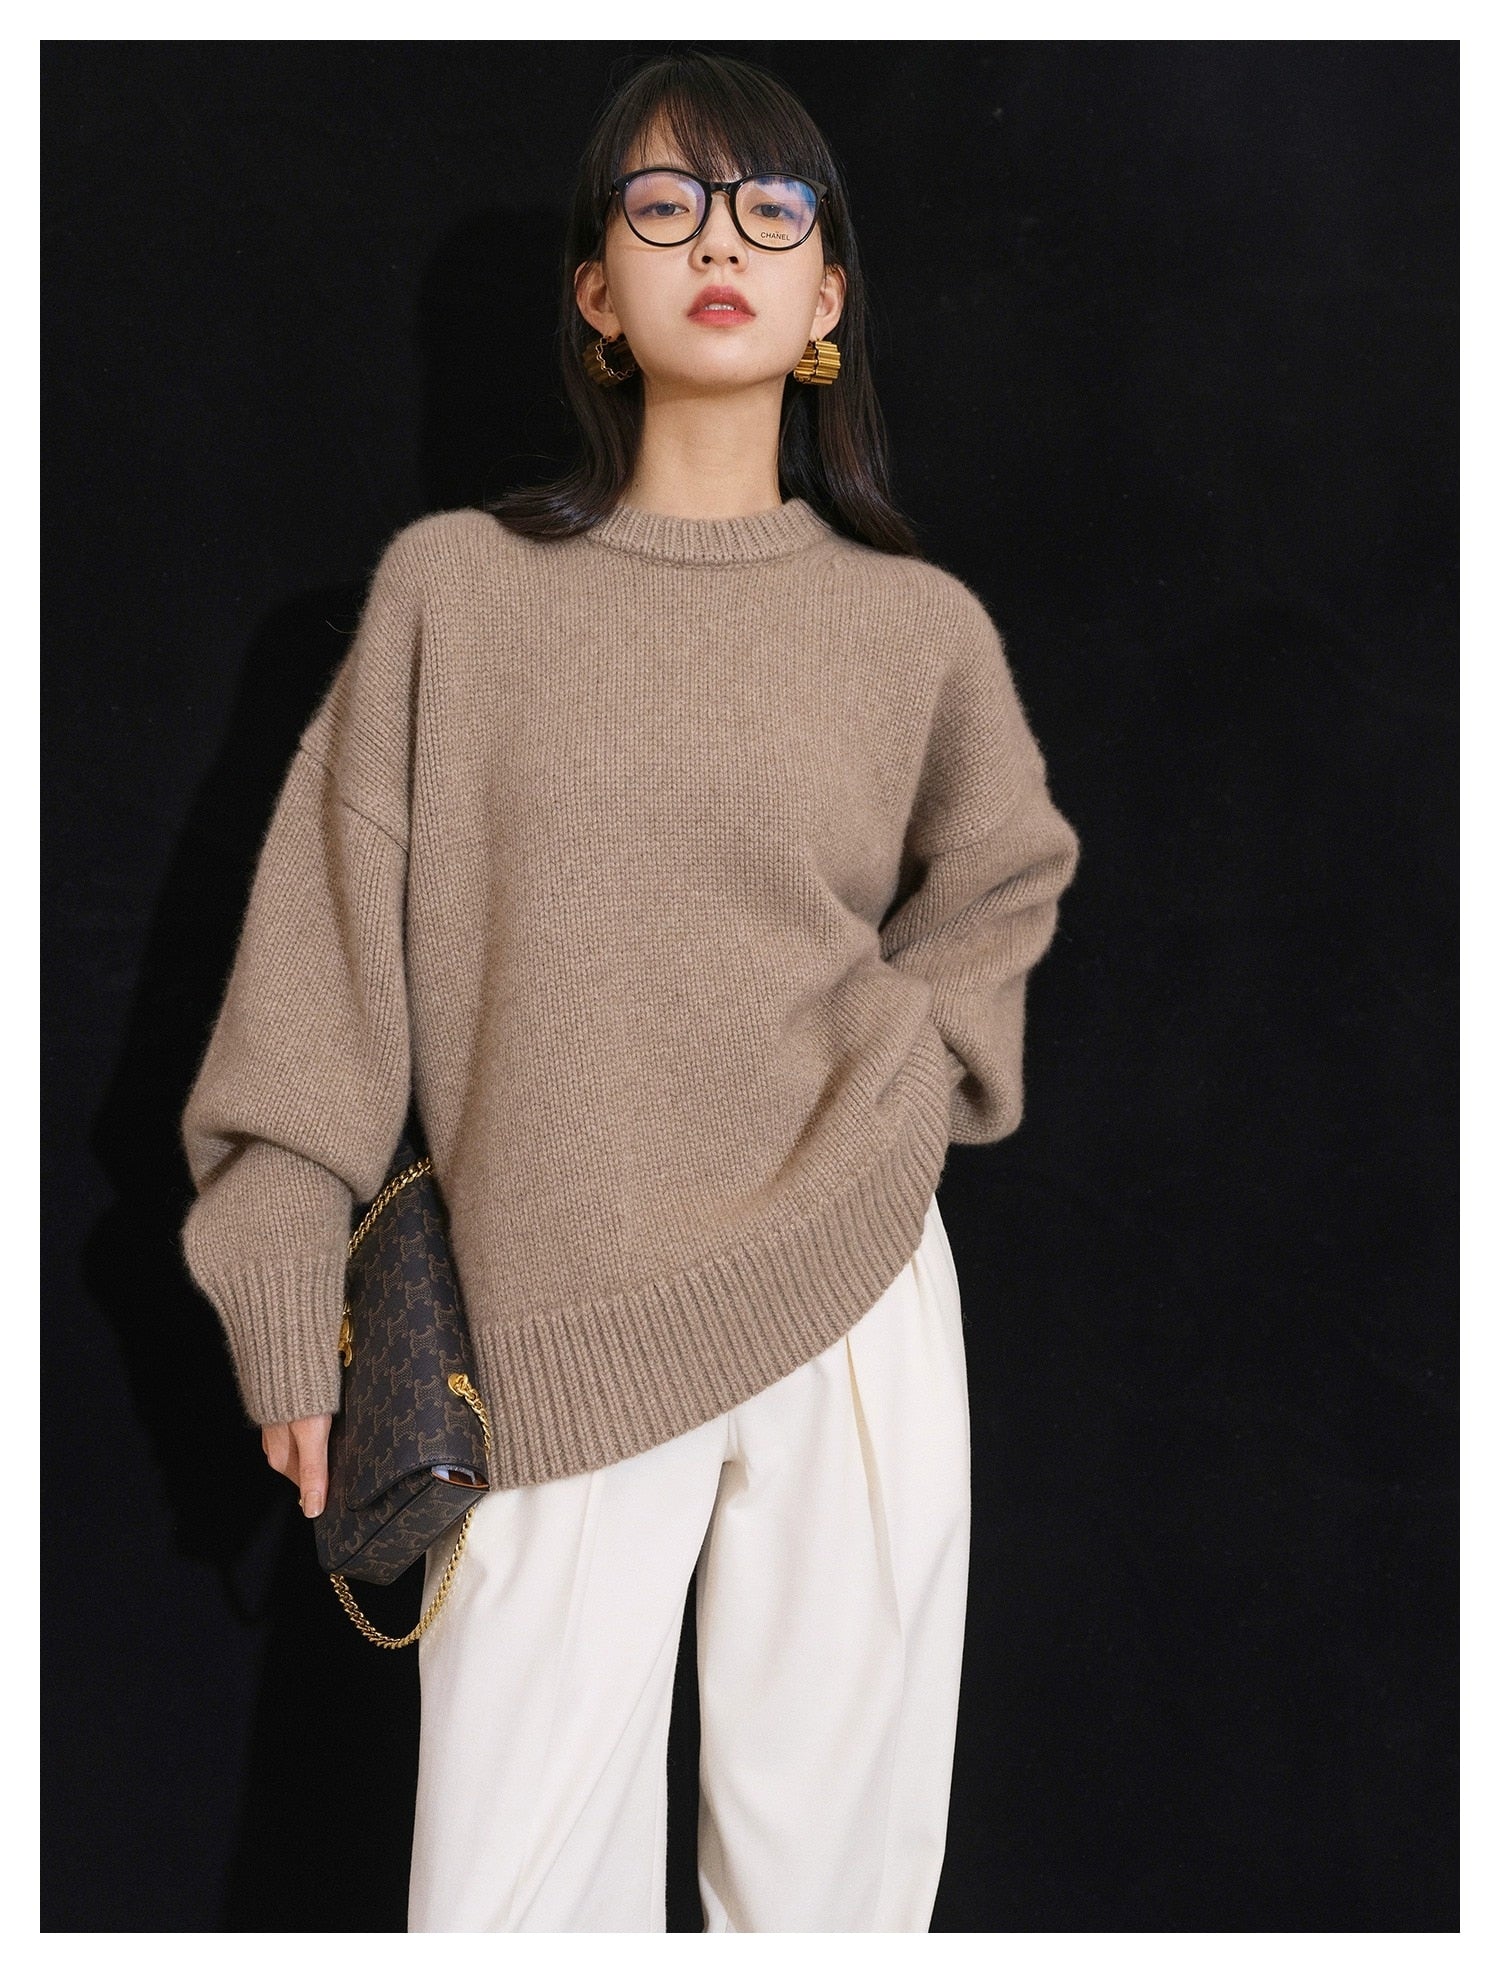 Women's European Round Neck Cashmere Sweater Loose Knit Base Pullover